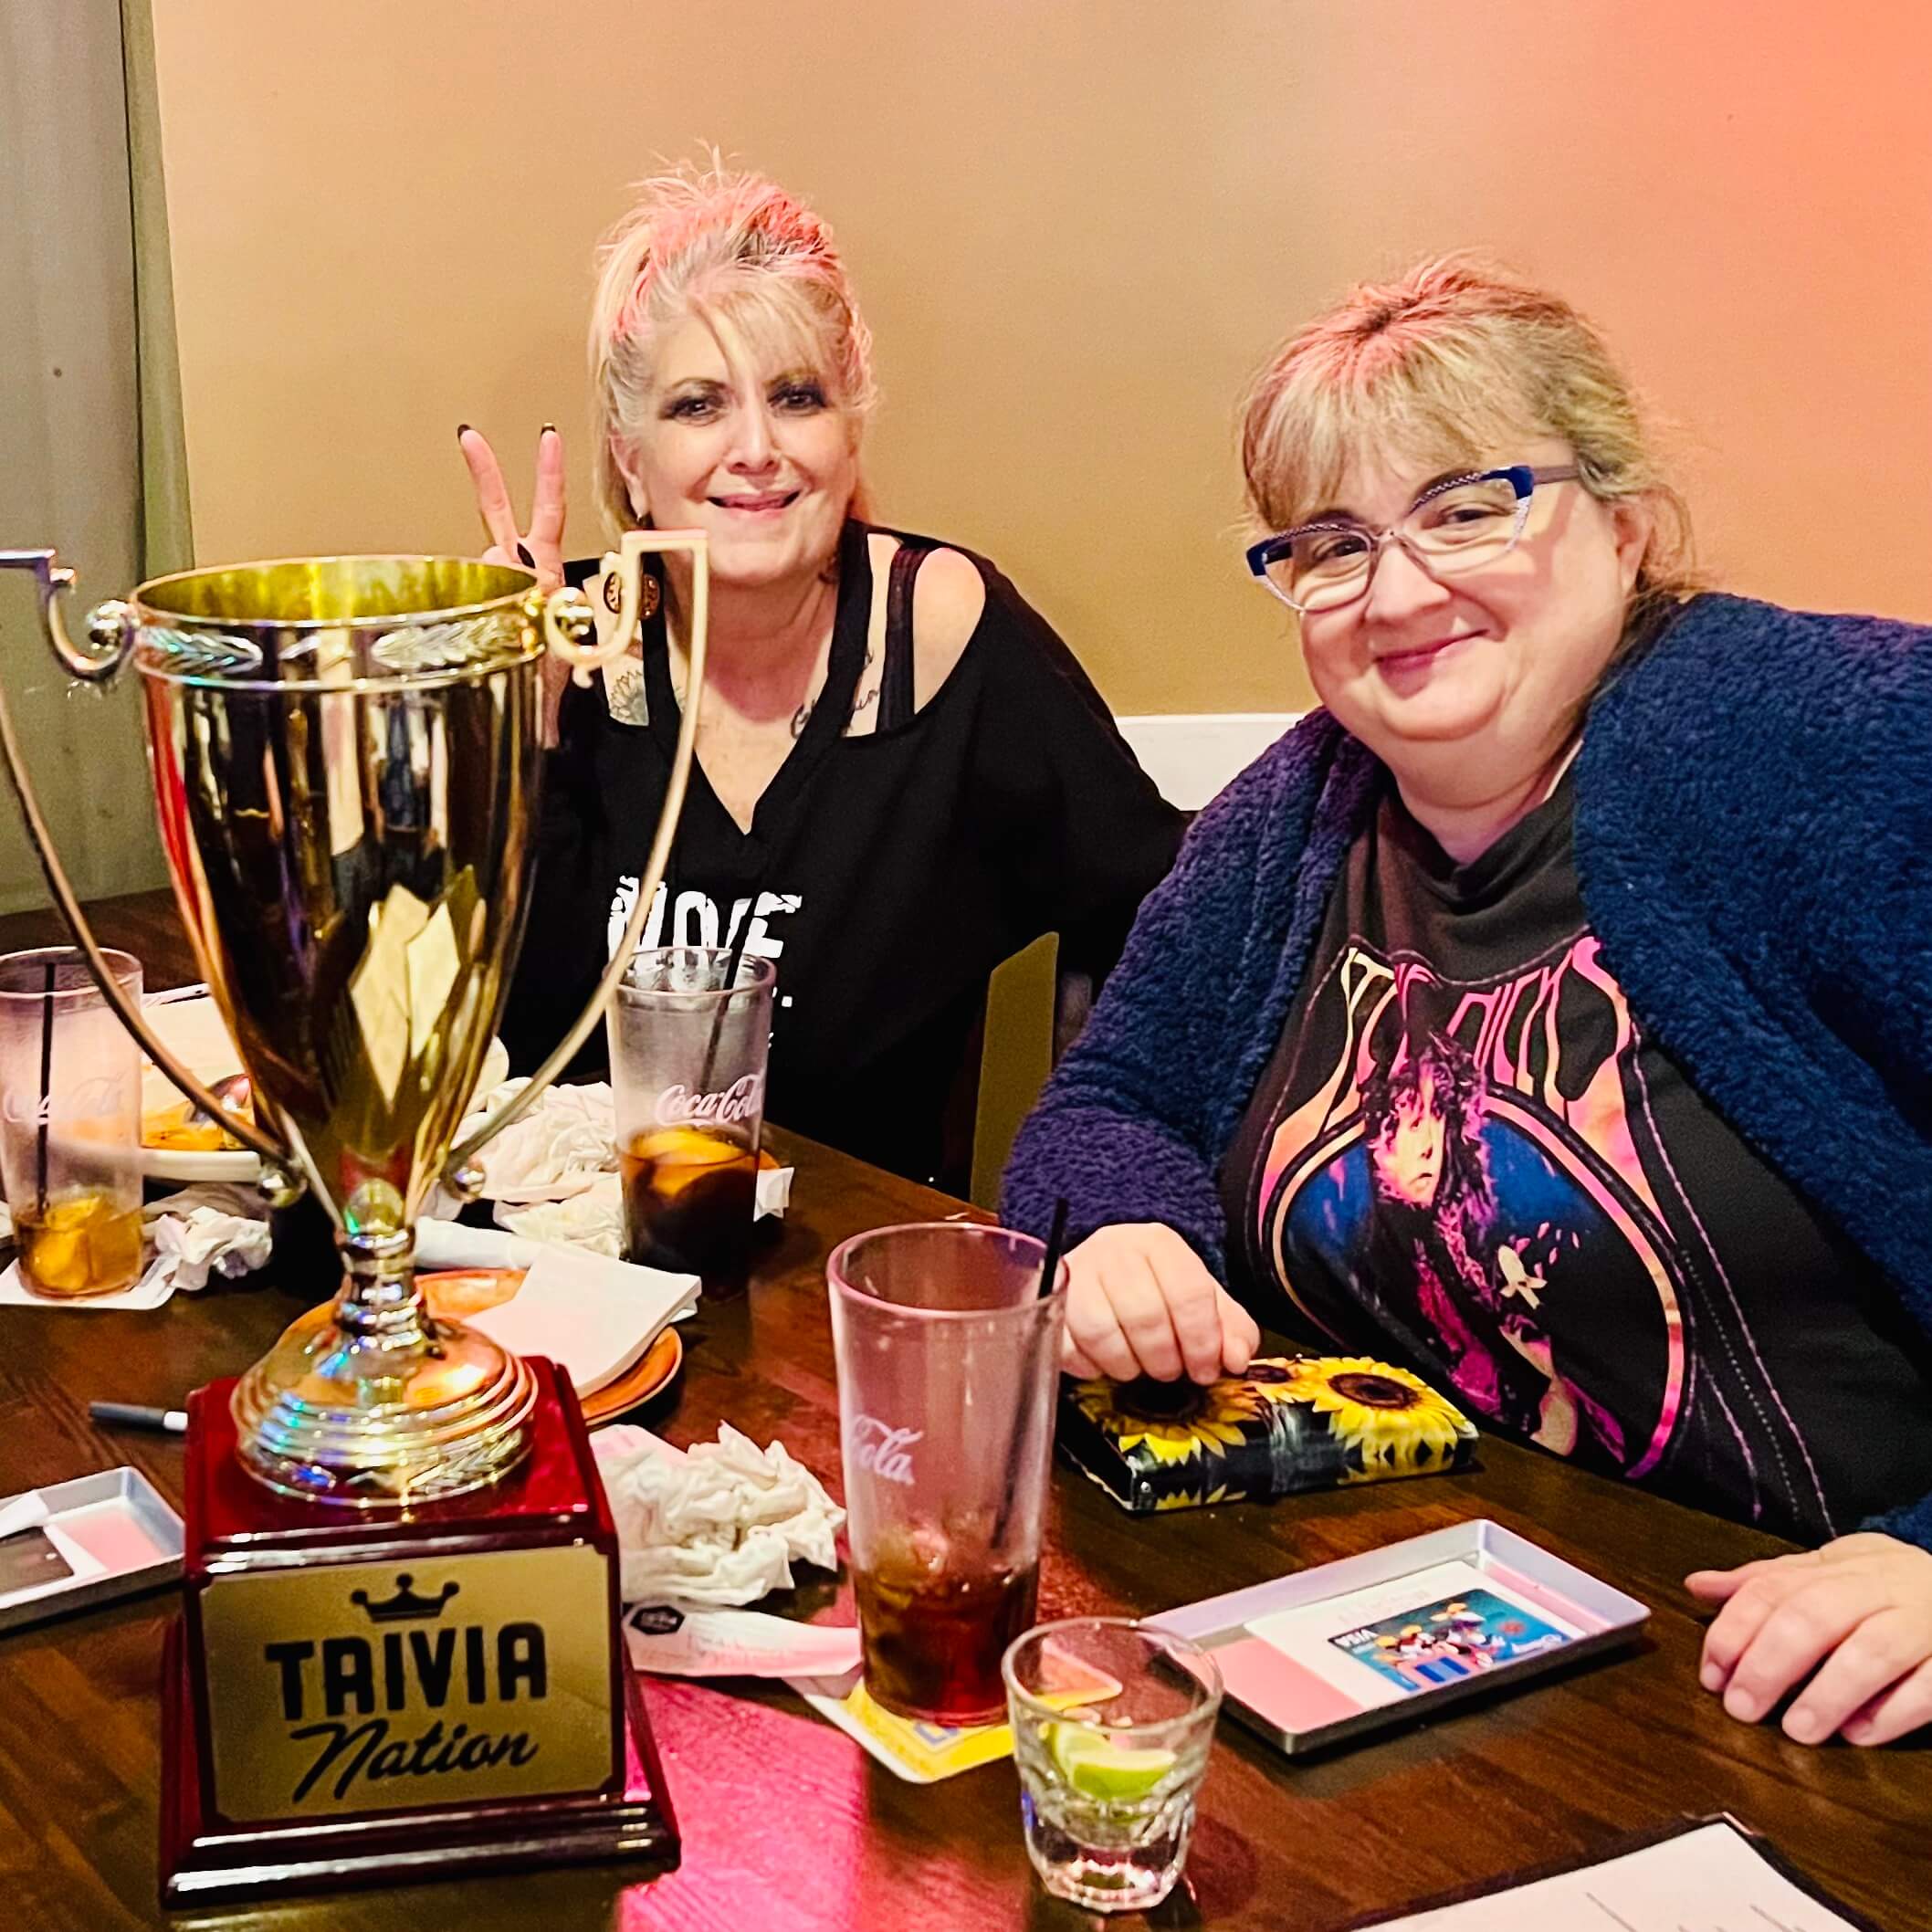 Lefty's Tavern & Grille Coral Springs FL 33076 trivia night 6